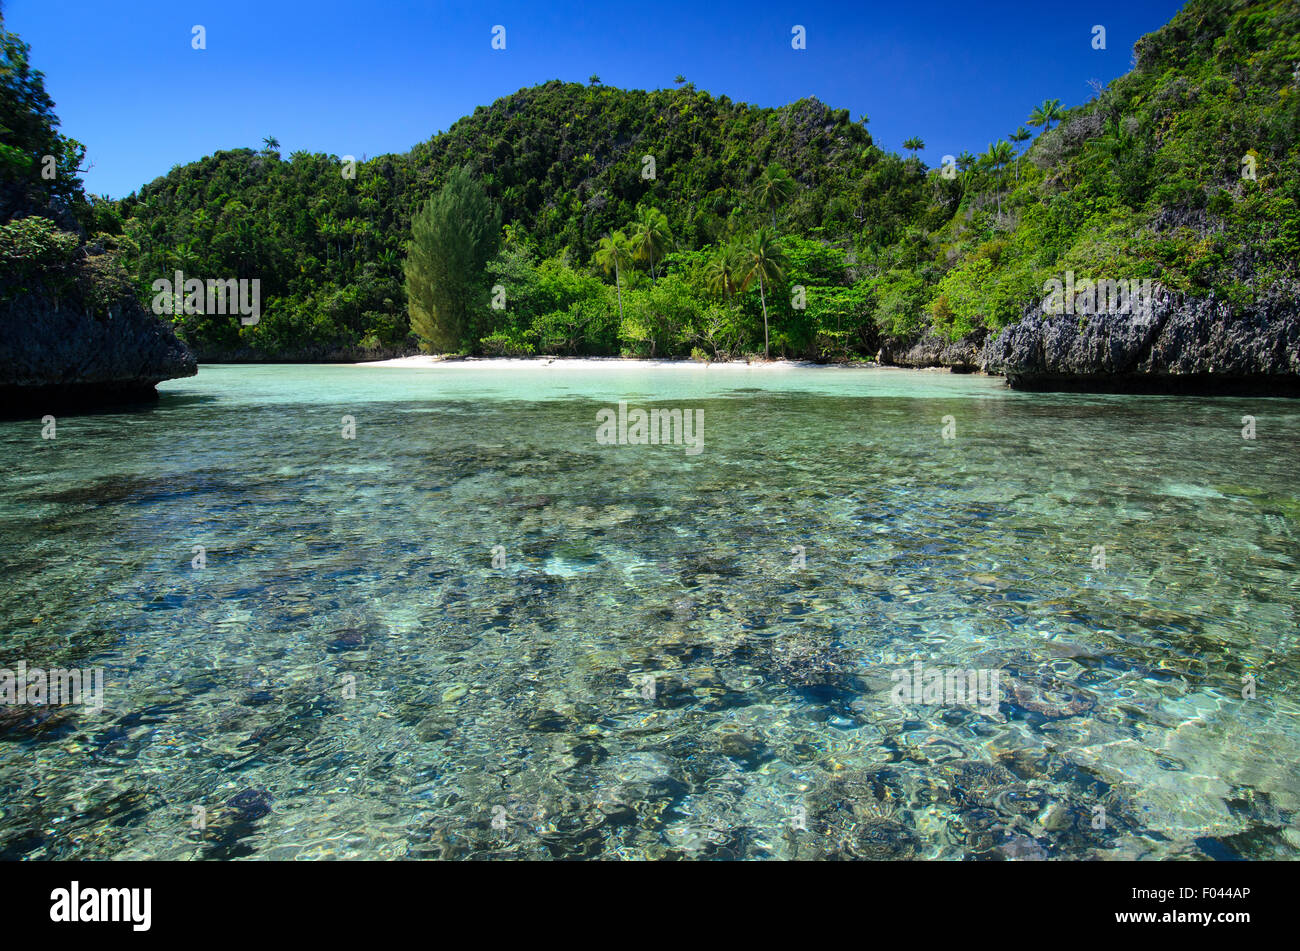 A small white beach fringed by coral reef and surrounded by greenery, Misool area, Raja Ampat, Indonesia, Pacific Ocean Stock Photo